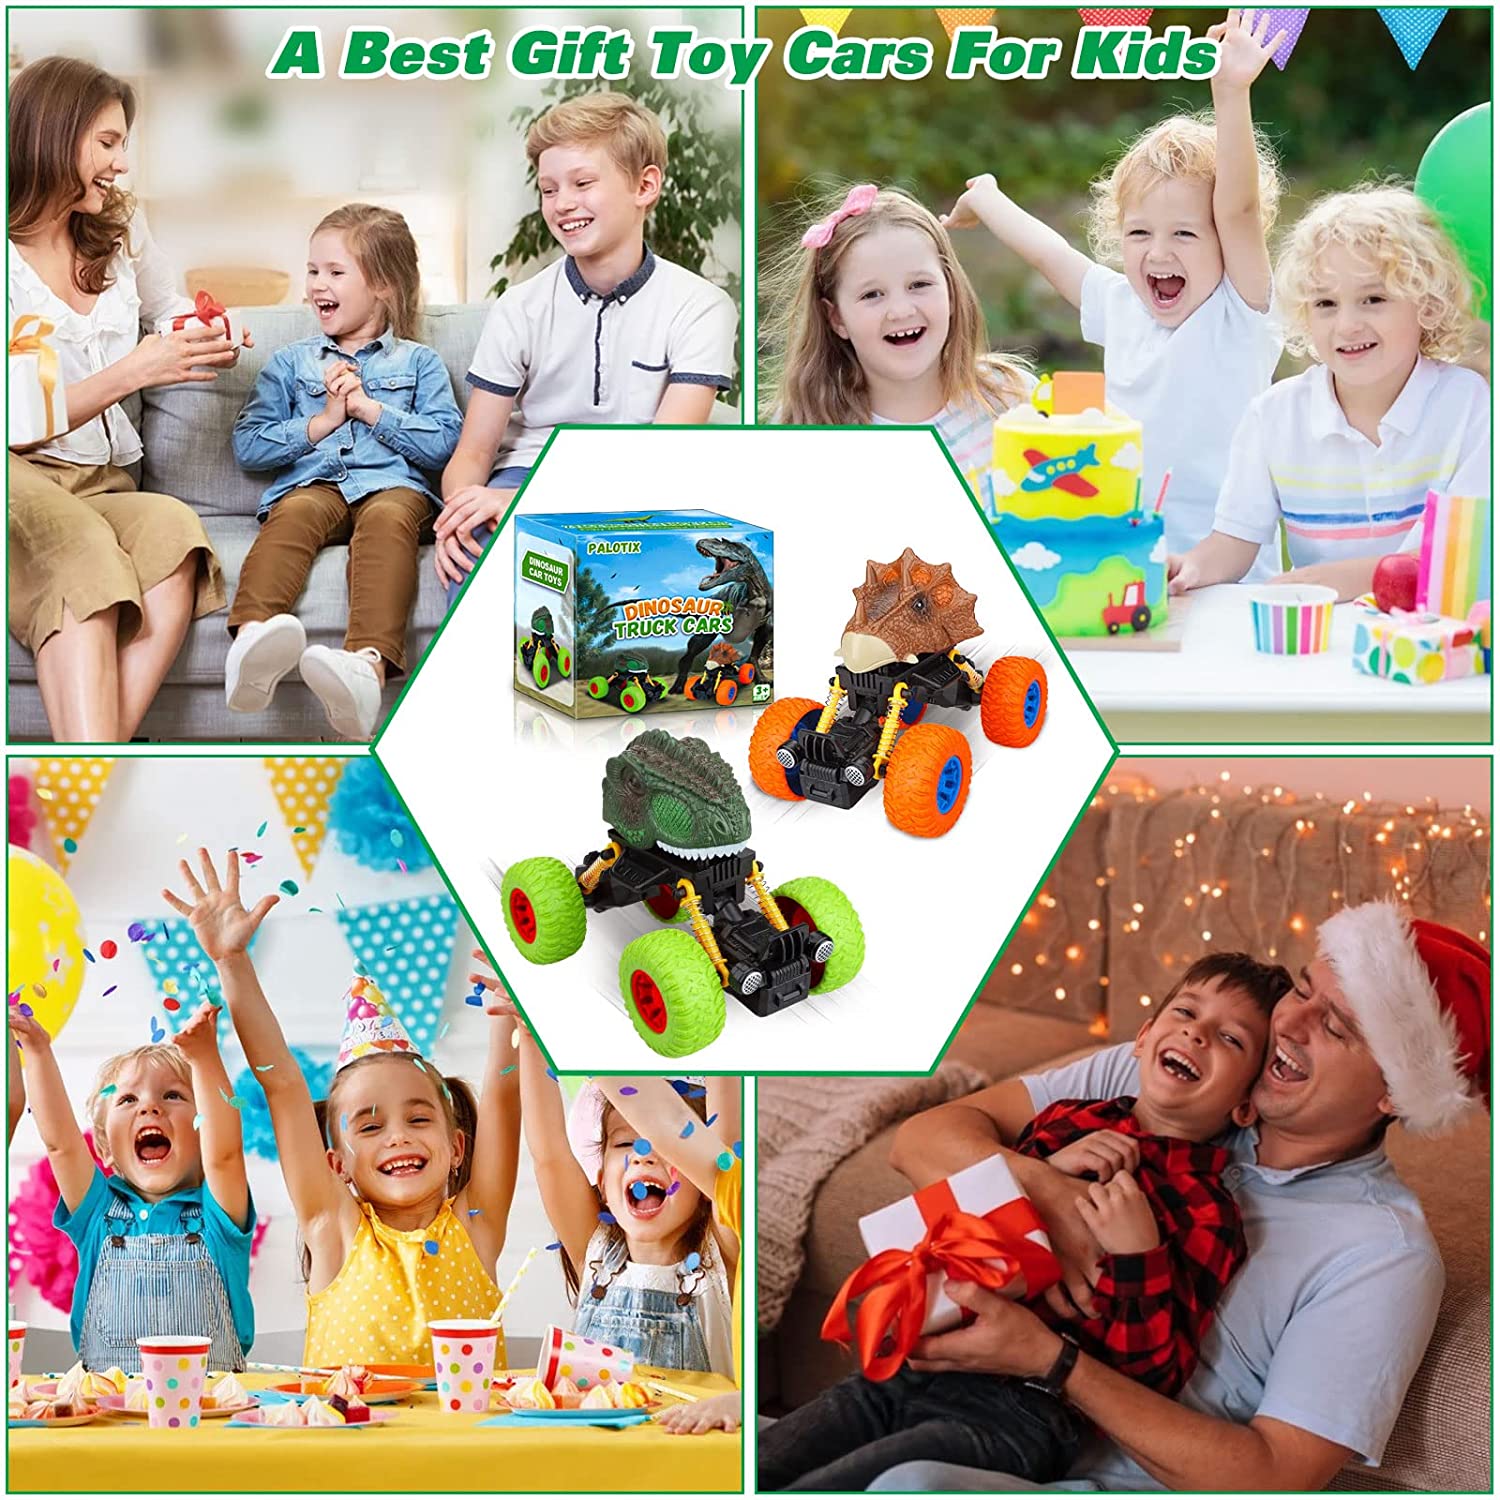  Toddler Chicken Easter Eggs Toys,Cars Advent Calendar for Kids,  Animal Stocking Stuffer Toy Cars with Animals Vehicles Set, Play Race Cars  and Trucks Perfect for Toddler, Boys and kids : Toys